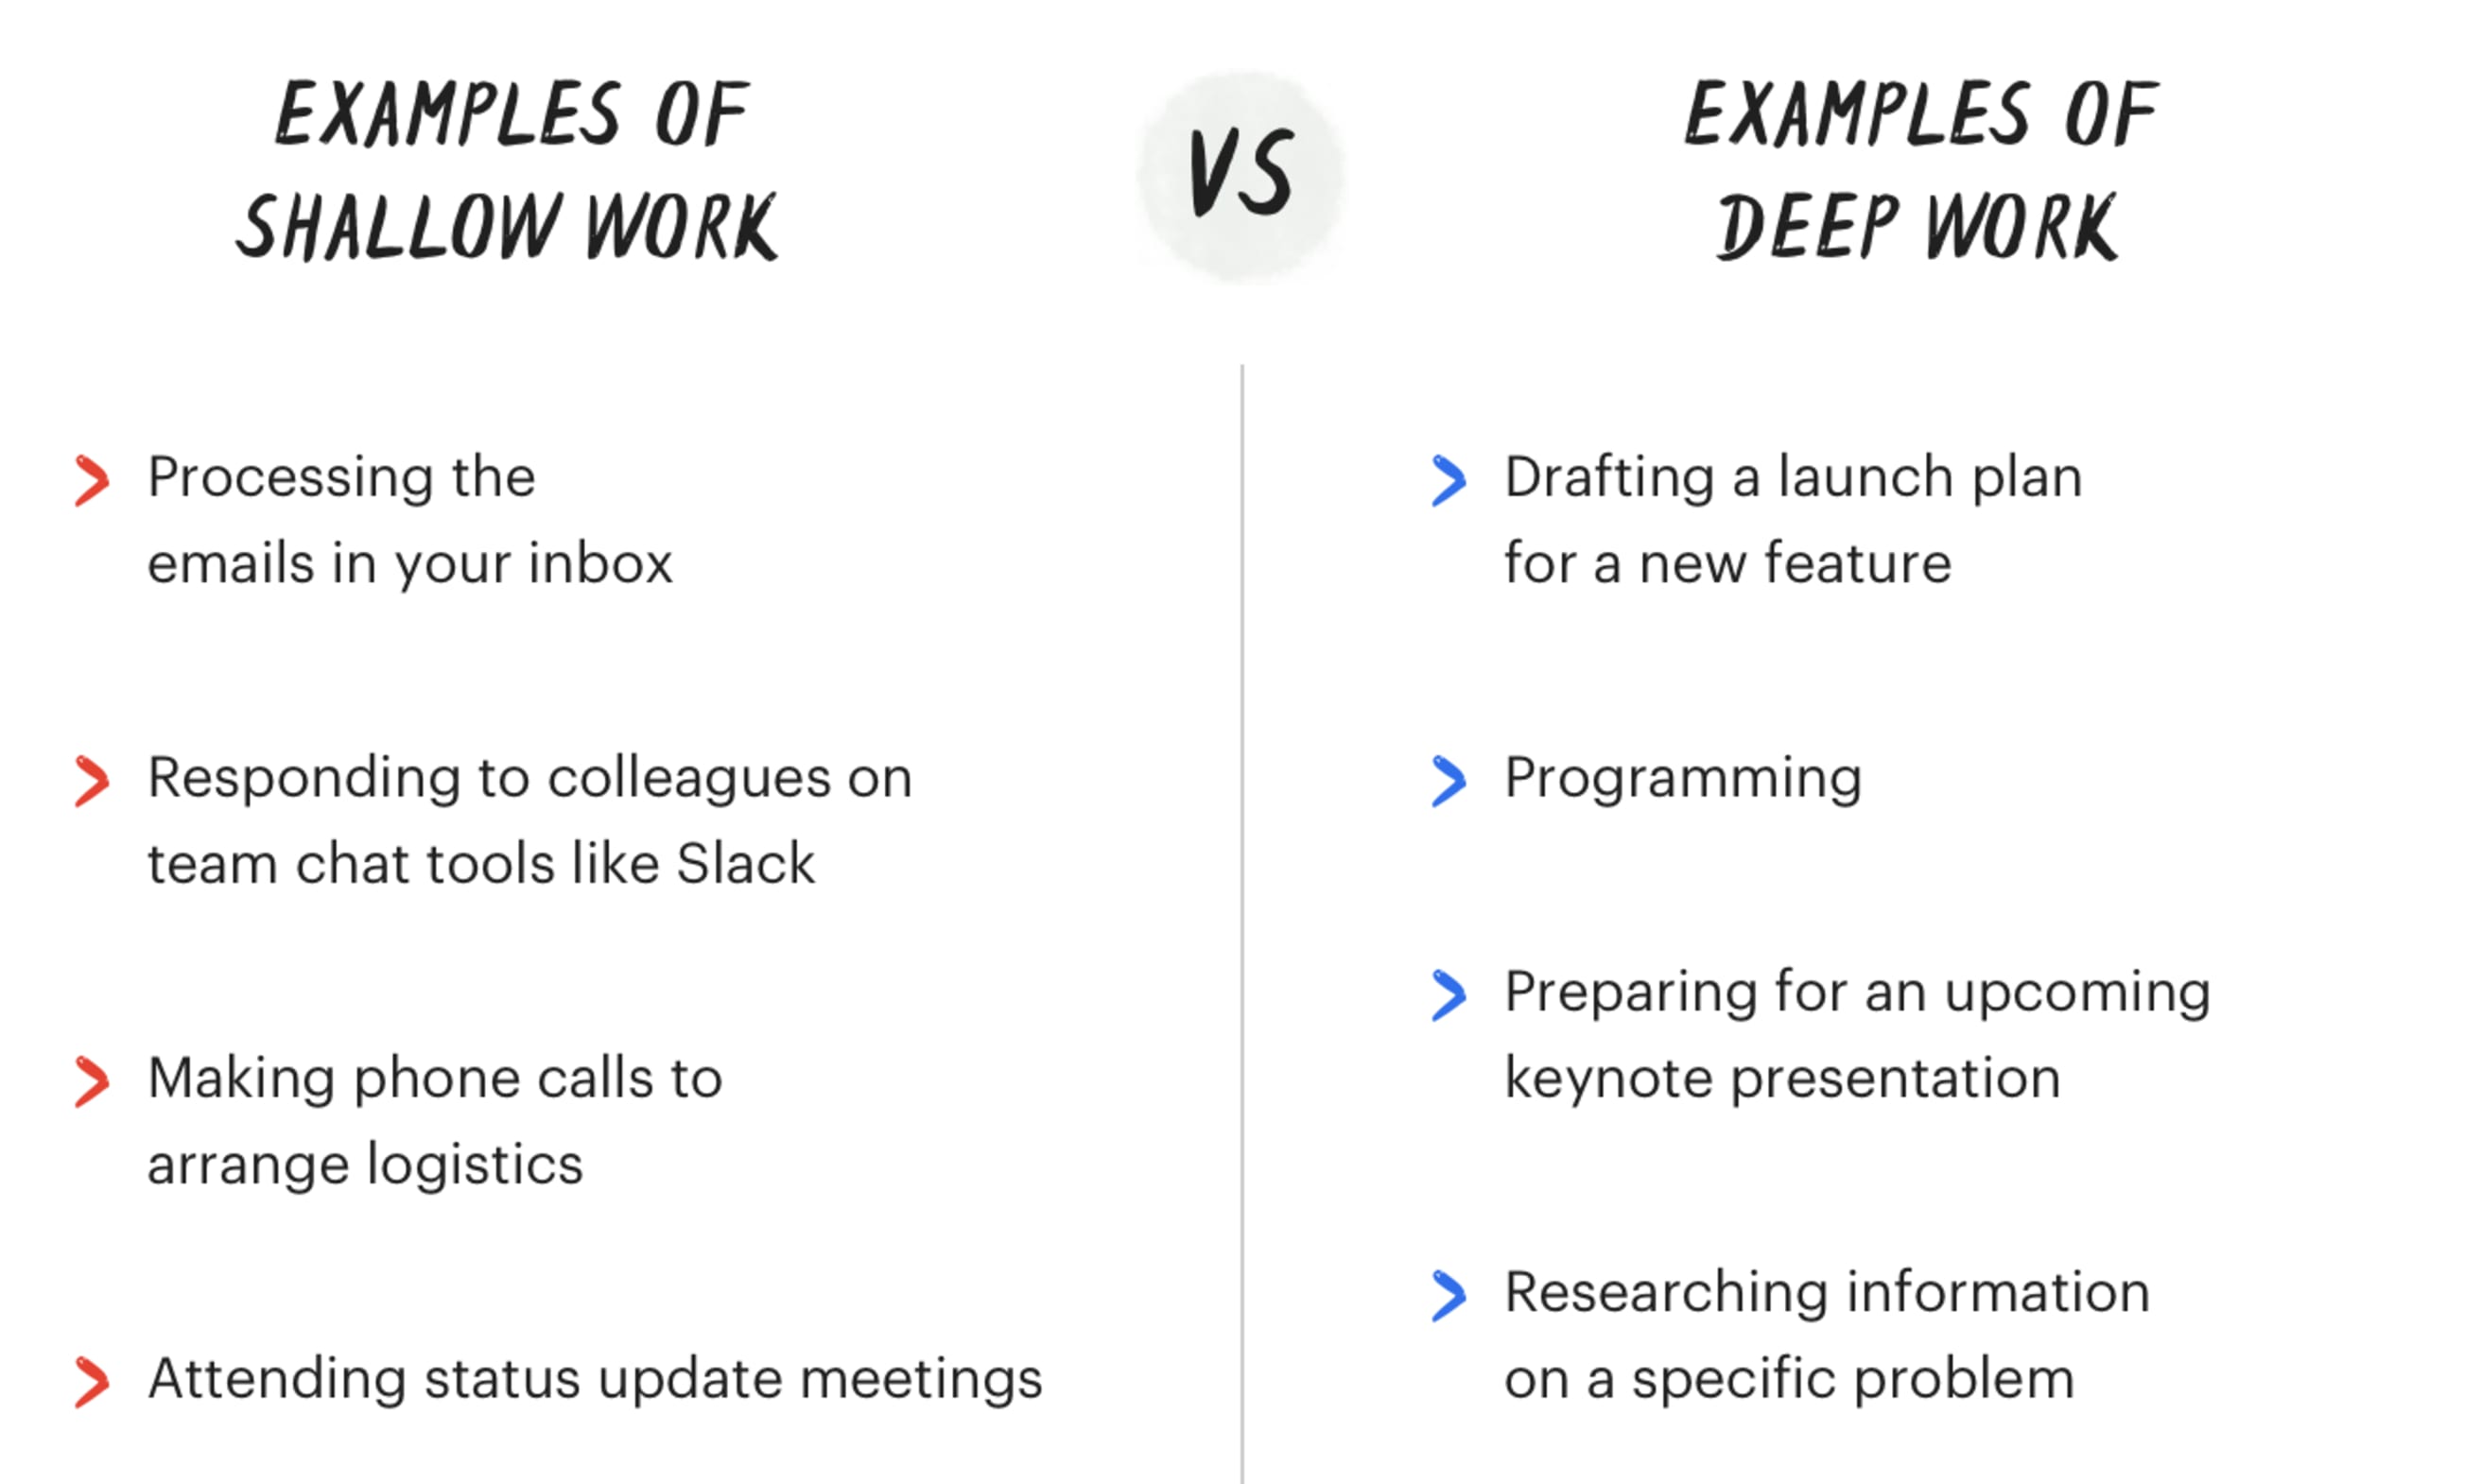 Table with examples of shallow vs deep work